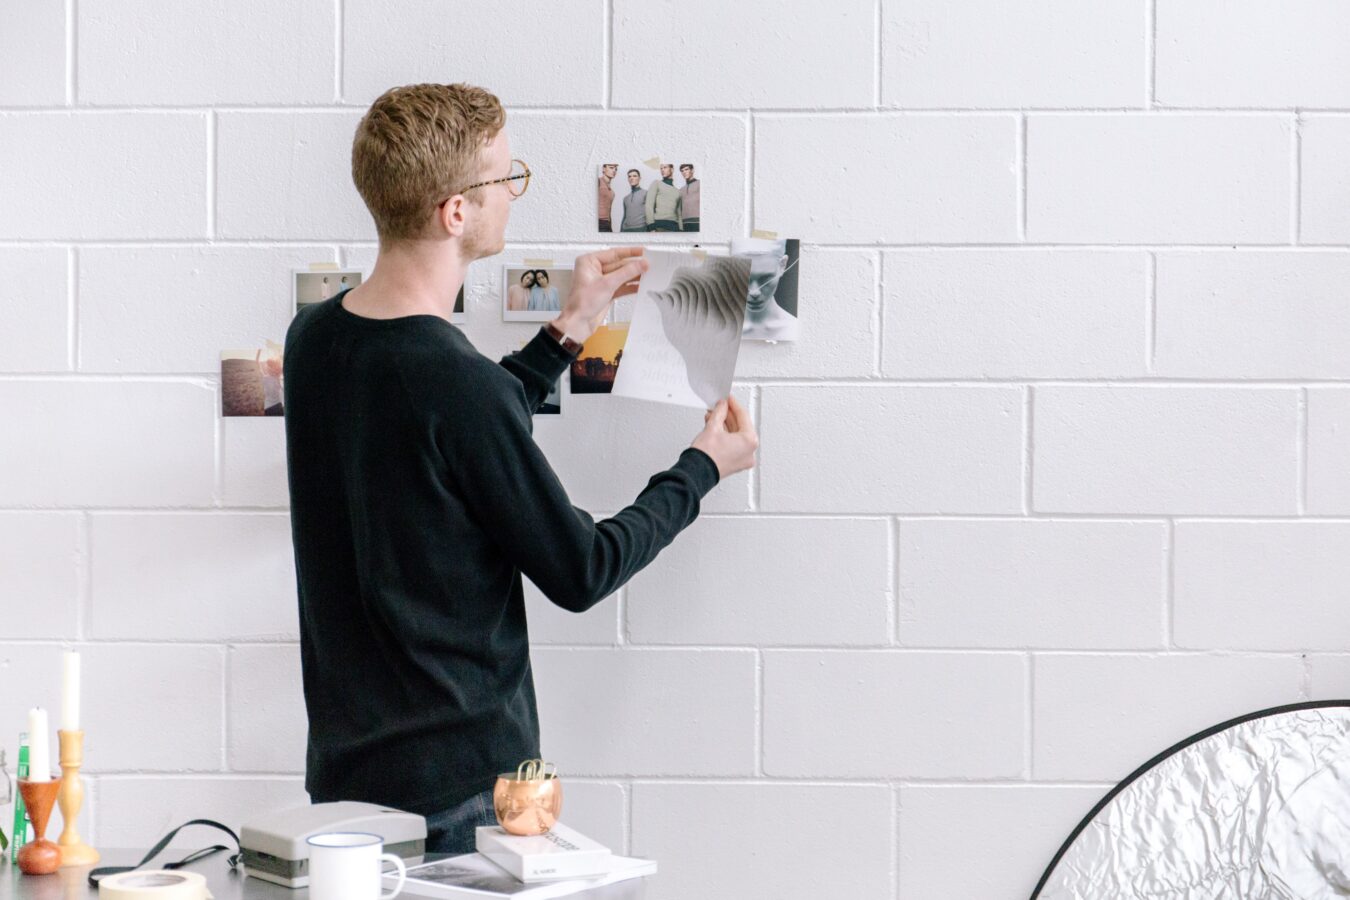 An employee adding photos to the wall to map and rethink customer experience.